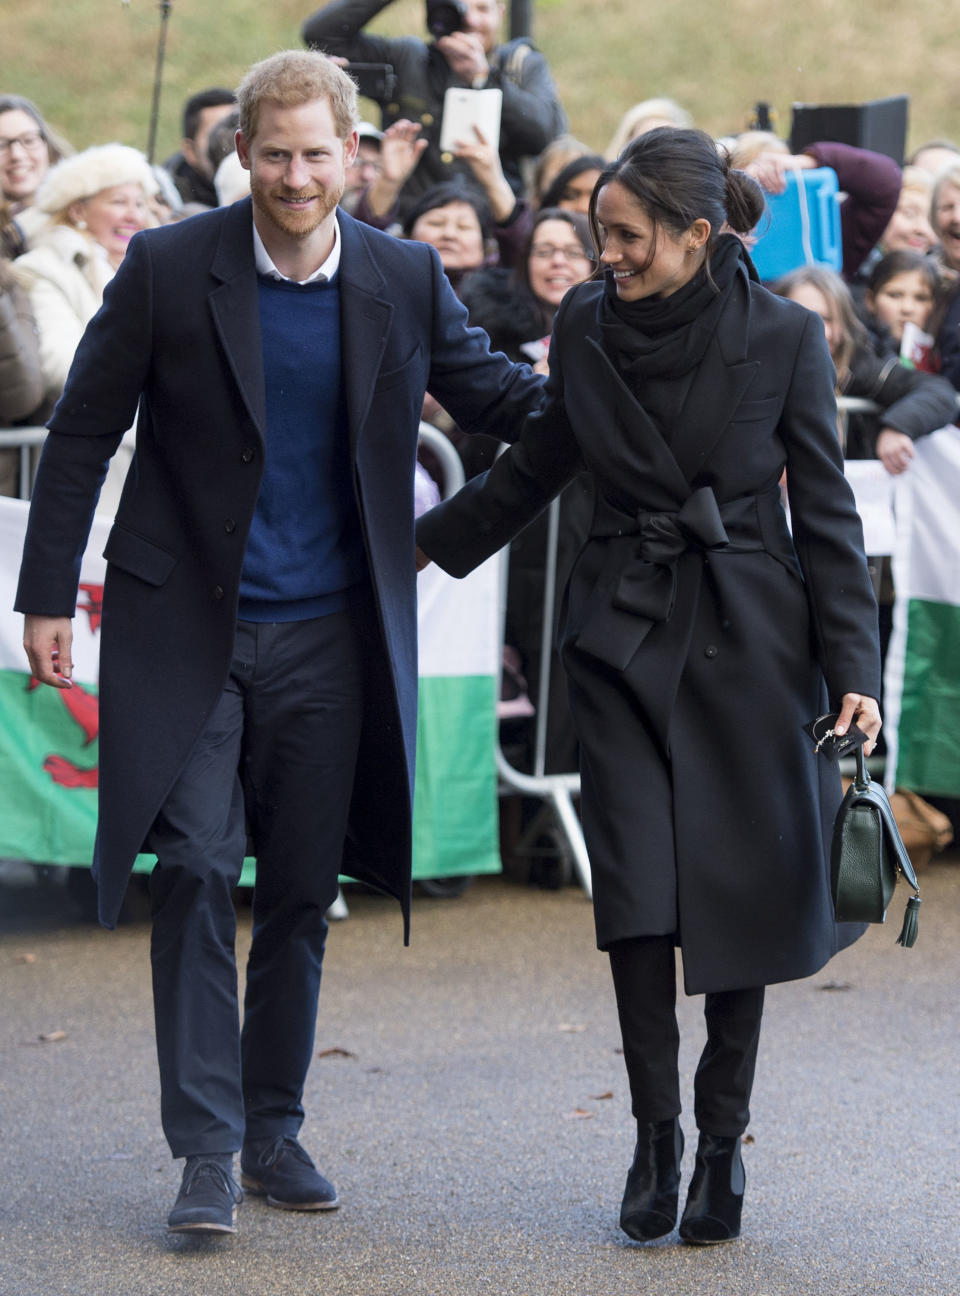 Prince Harry and Meghan Markle arrive at Cardiff Castle on Jan. 18, 2018. (Photo: Mark Cuthbert via Getty Images)